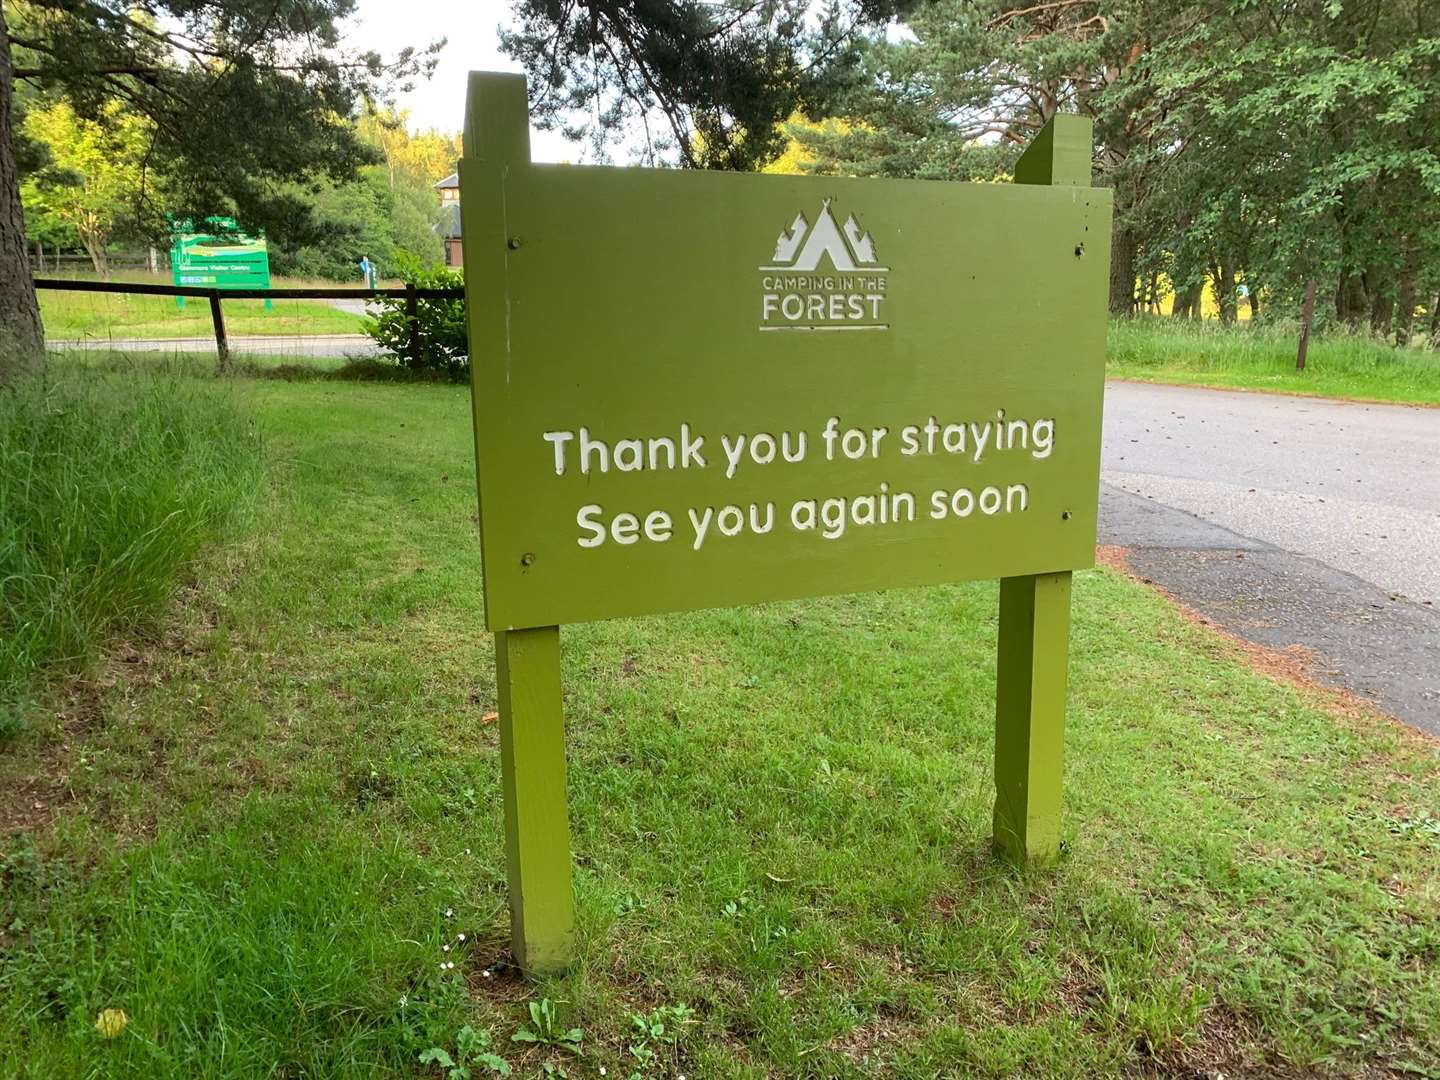 Haste ye back? The campsite is not due to reopen until April 2021.